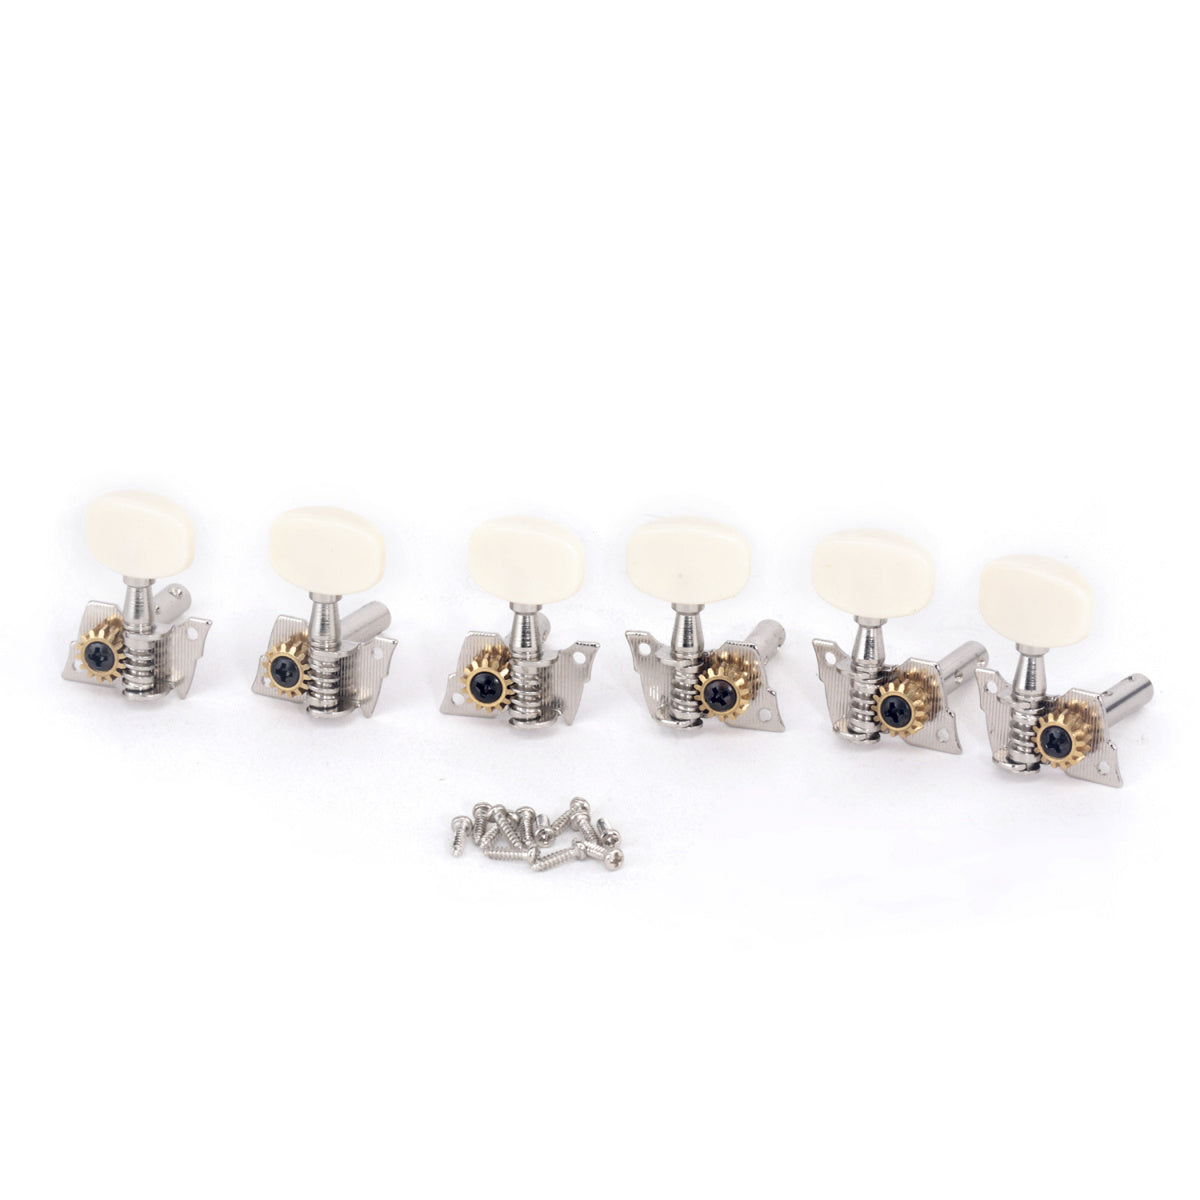 Musiclily Pro 3+3 Acoustic Guitar Machine Heads Tuning Pegs Keys Tuners Set, Nickel with Oval Button